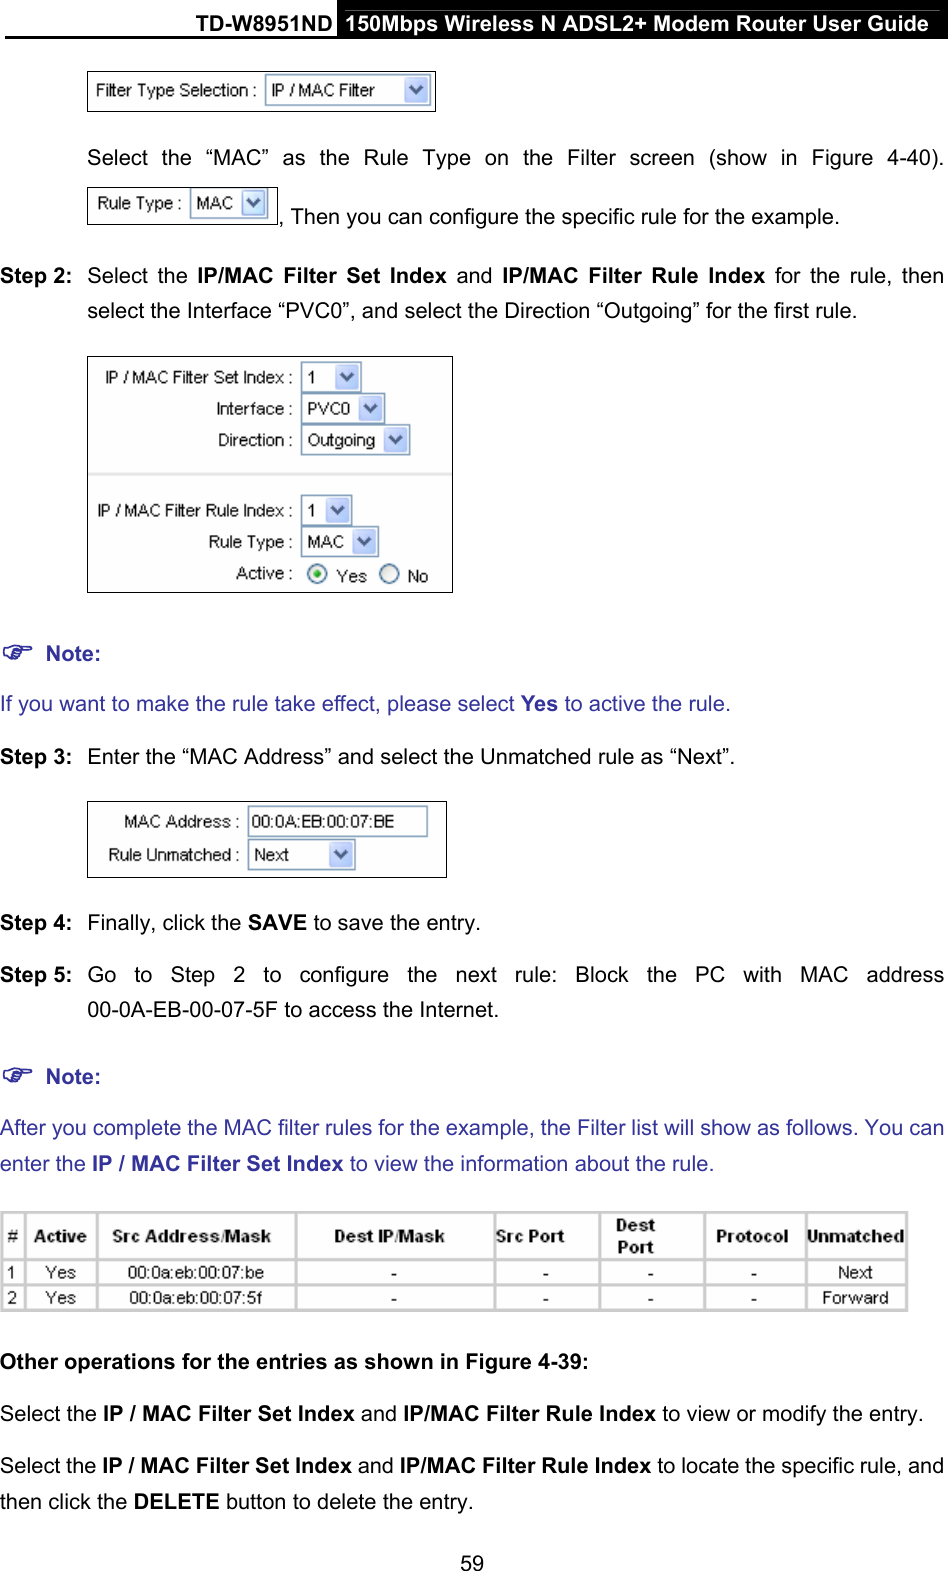 TD-W8951ND  150Mbps Wireless N ADSL2+ Modem Router User Guide  Select the “MAC” as the Rule Type on the Filter screen (show in Figure 4-40). , Then you can configure the specific rule for the example. Step 2:  Select the IP/MAC Filter Set Index and IP/MAC Filter Rule Index for the rule, then select the Interface “PVC0”, and select the Direction “Outgoing” for the first rule.  ) Note: If you want to make the rule take effect, please select Yes to active the rule. Step 3:  Enter the “MAC Address” and select the Unmatched rule as “Next”.  Step 4:  Finally, click the SAVE to save the entry. Step 5:  Go to Step 2 to configure the next rule: Block the PC with MAC address 00-0A-EB-00-07-5F to access the Internet. ) Note: After you complete the MAC filter rules for the example, the Filter list will show as follows. You can enter the IP / MAC Filter Set Index to view the information about the rule.  Other operations for the entries as shown in Figure 4-39: Select the IP / MAC Filter Set Index and IP/MAC Filter Rule Index to view or modify the entry. Select the IP / MAC Filter Set Index and IP/MAC Filter Rule Index to locate the specific rule, and then click the DELETE button to delete the entry. 59 